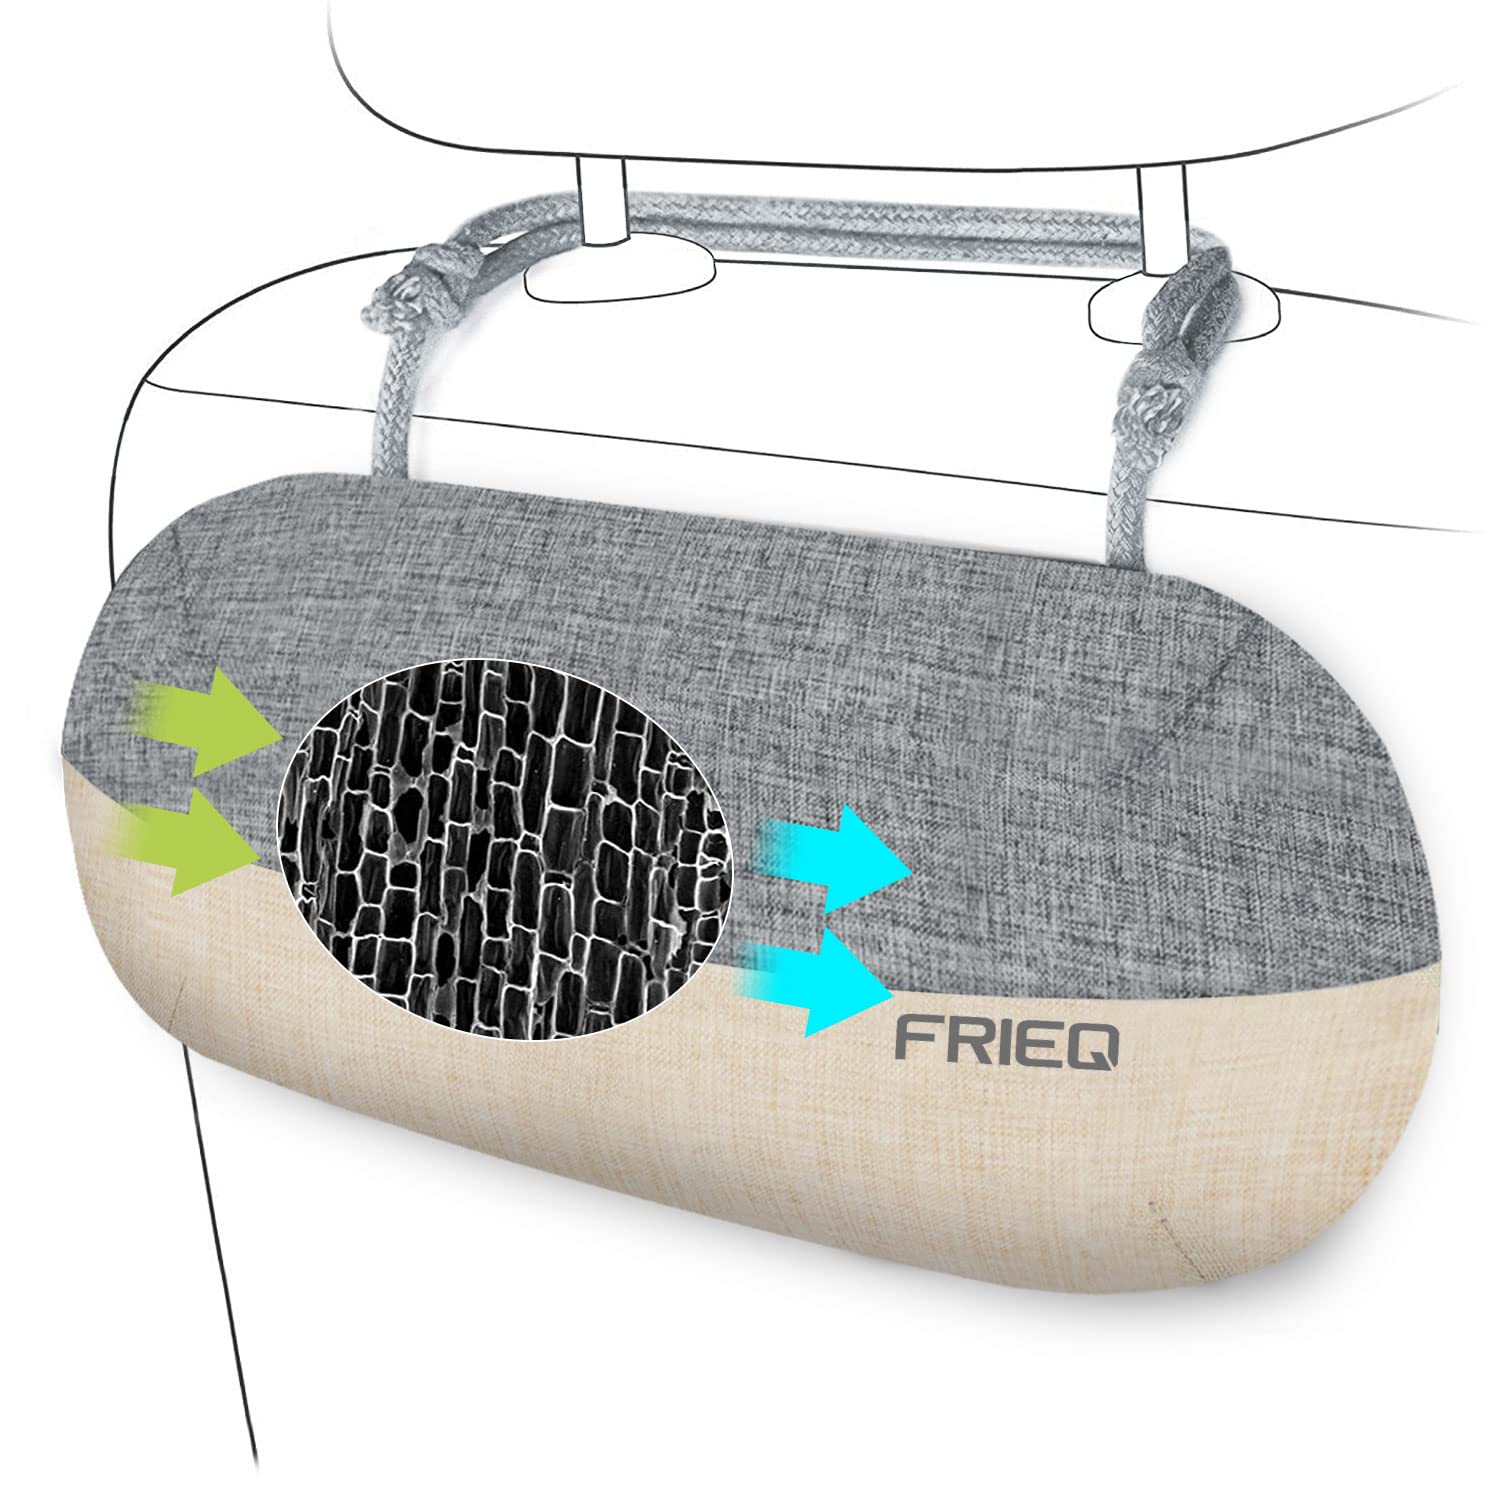 FRiEQ Car Air Freshener, 100% Activated Bamboo Charcoal Air Purifying Bag, Lasts 365+ Days